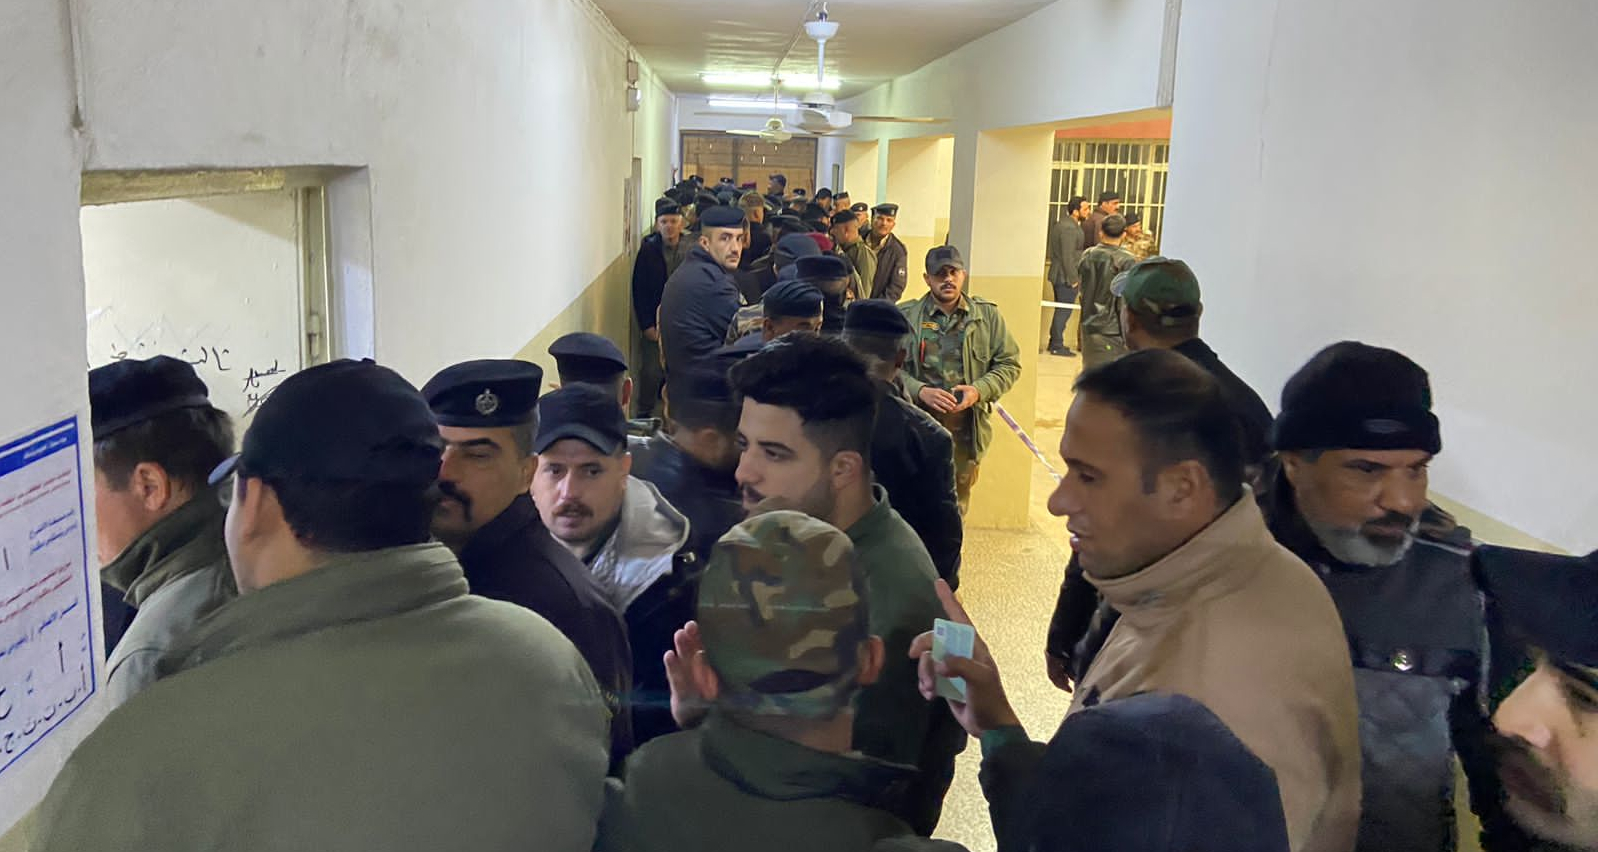 Local officers report high voter turnout in Nineveh and Saladin's special election